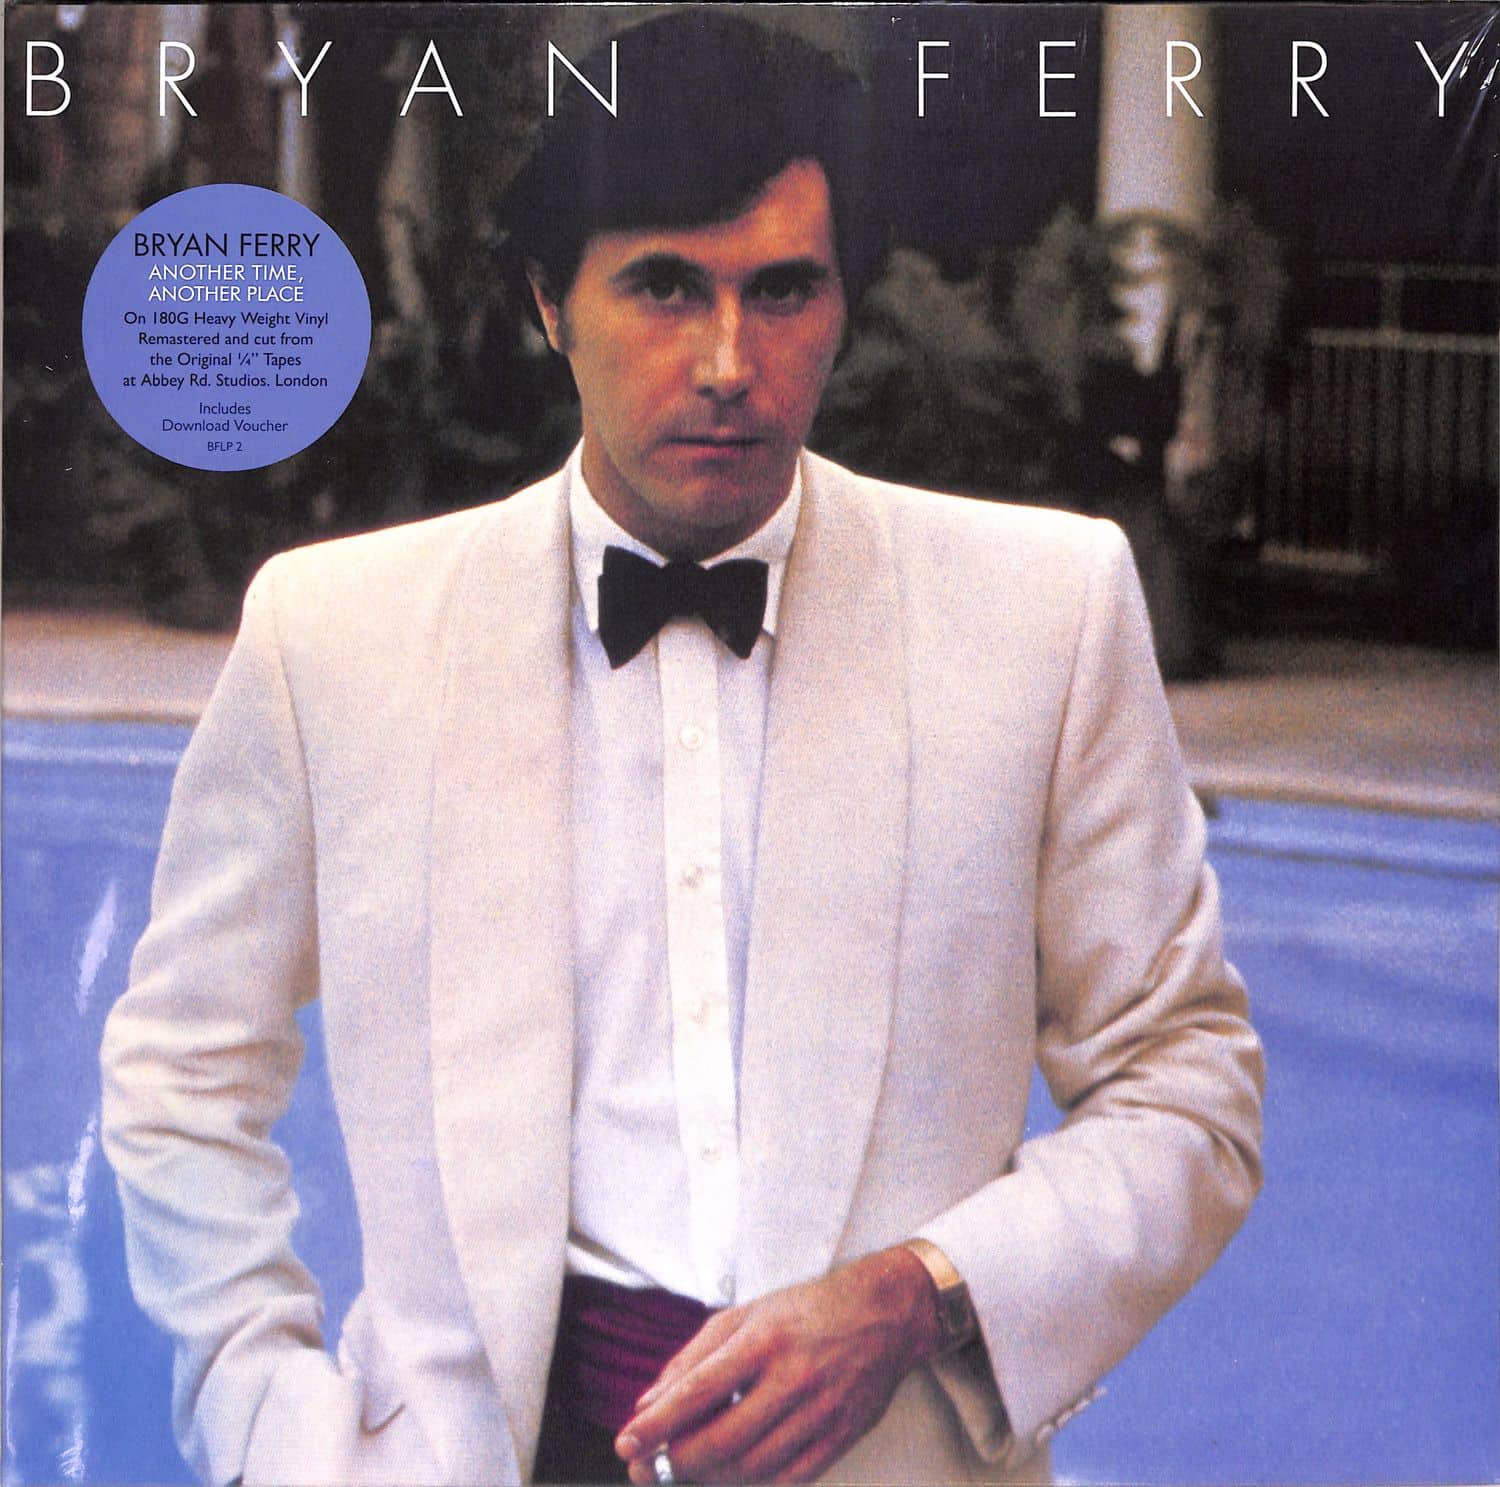 Bryan Ferry - ANOTHER TIME, ANOTHER PLACE 